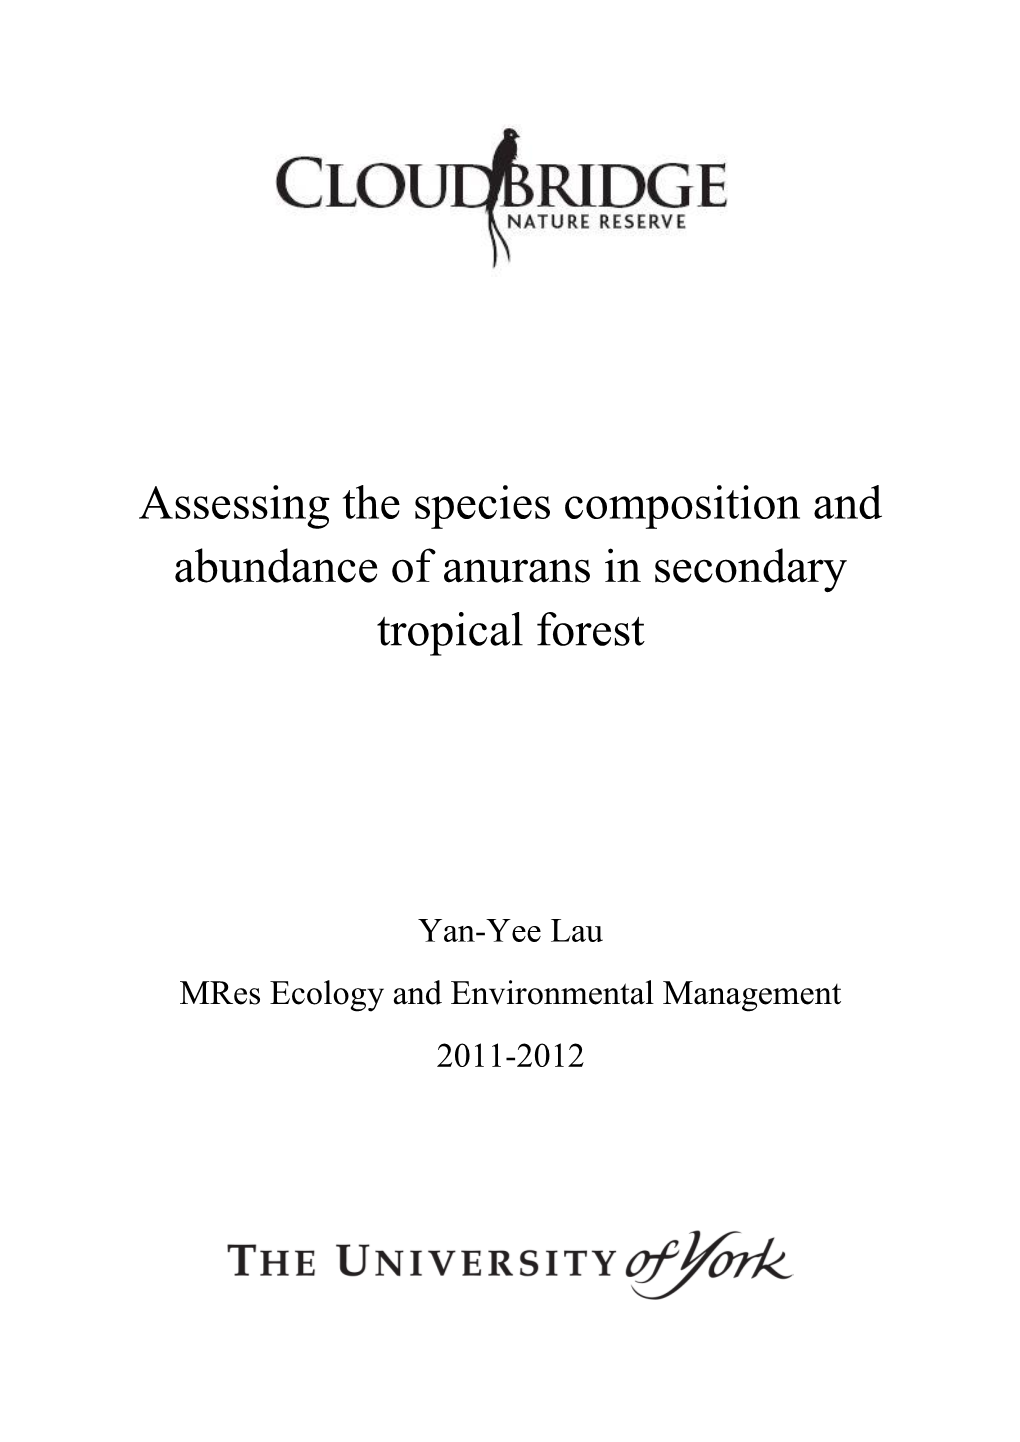 Assessing the Species Composition and Abundance of Anurans in Secondary Tropical Forest